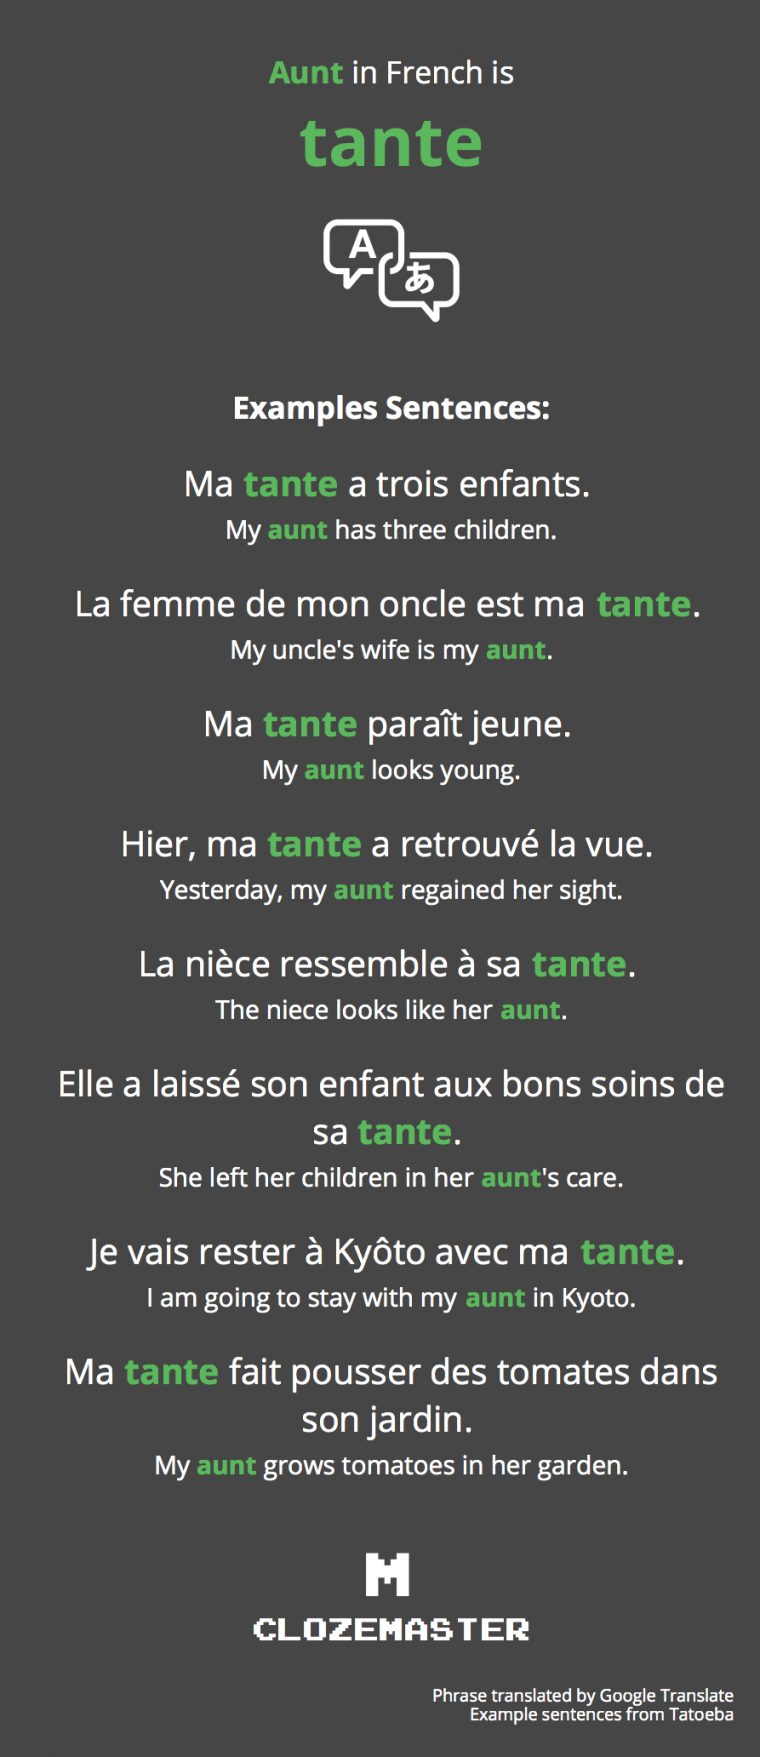 How To Say Aunt In French – Clozemaster à Transate Jardin